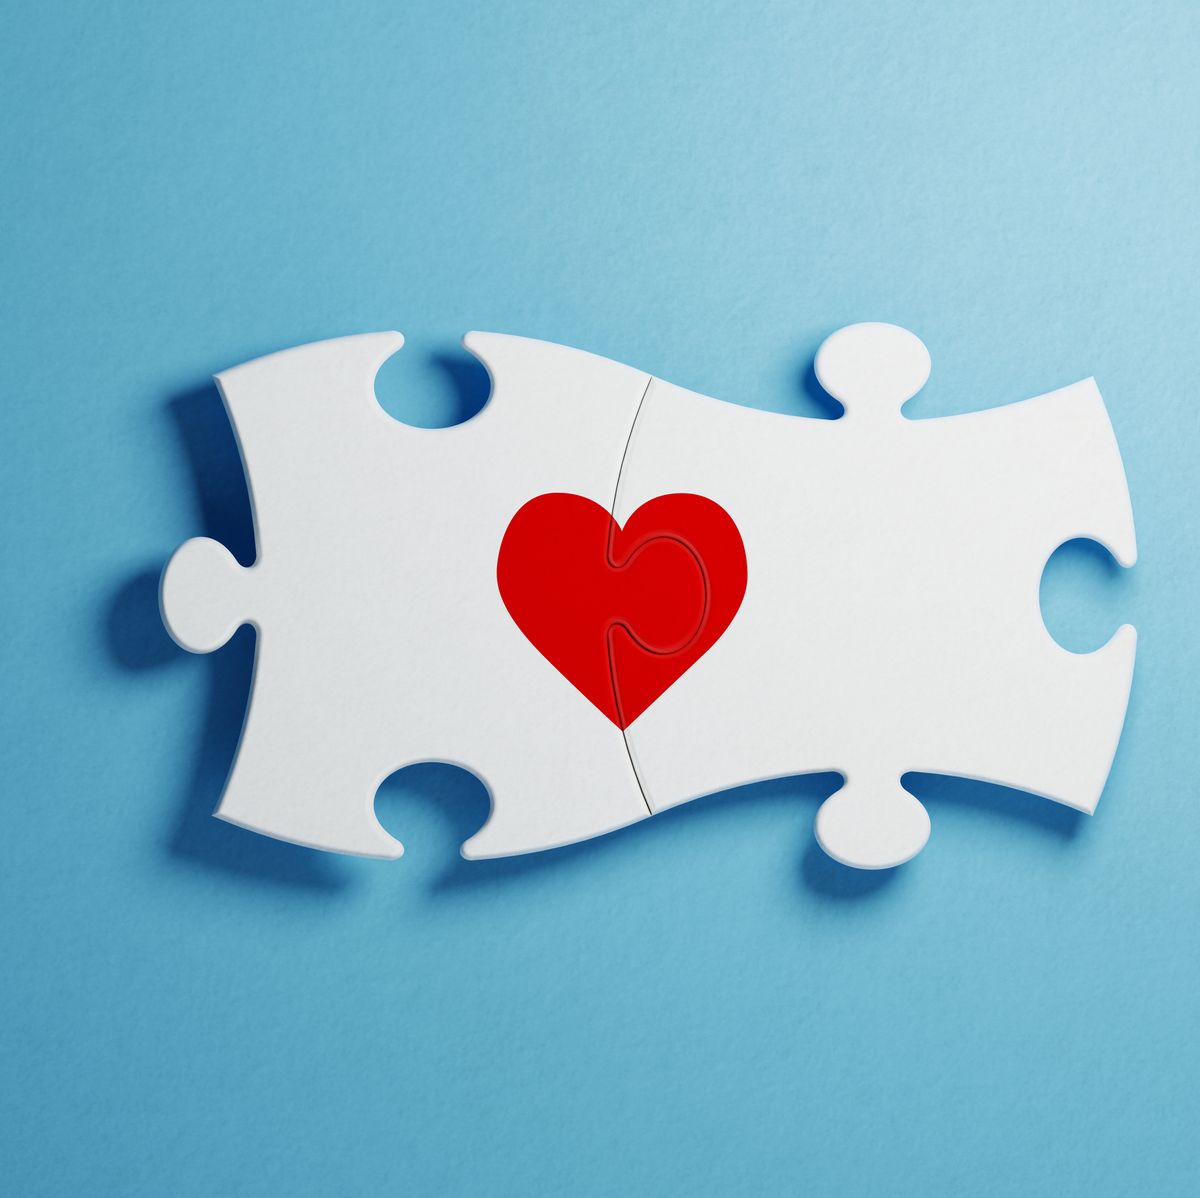 Love And Puzzle Concept - White Jigsaw Puzzle Pieces Forming A Red Heart